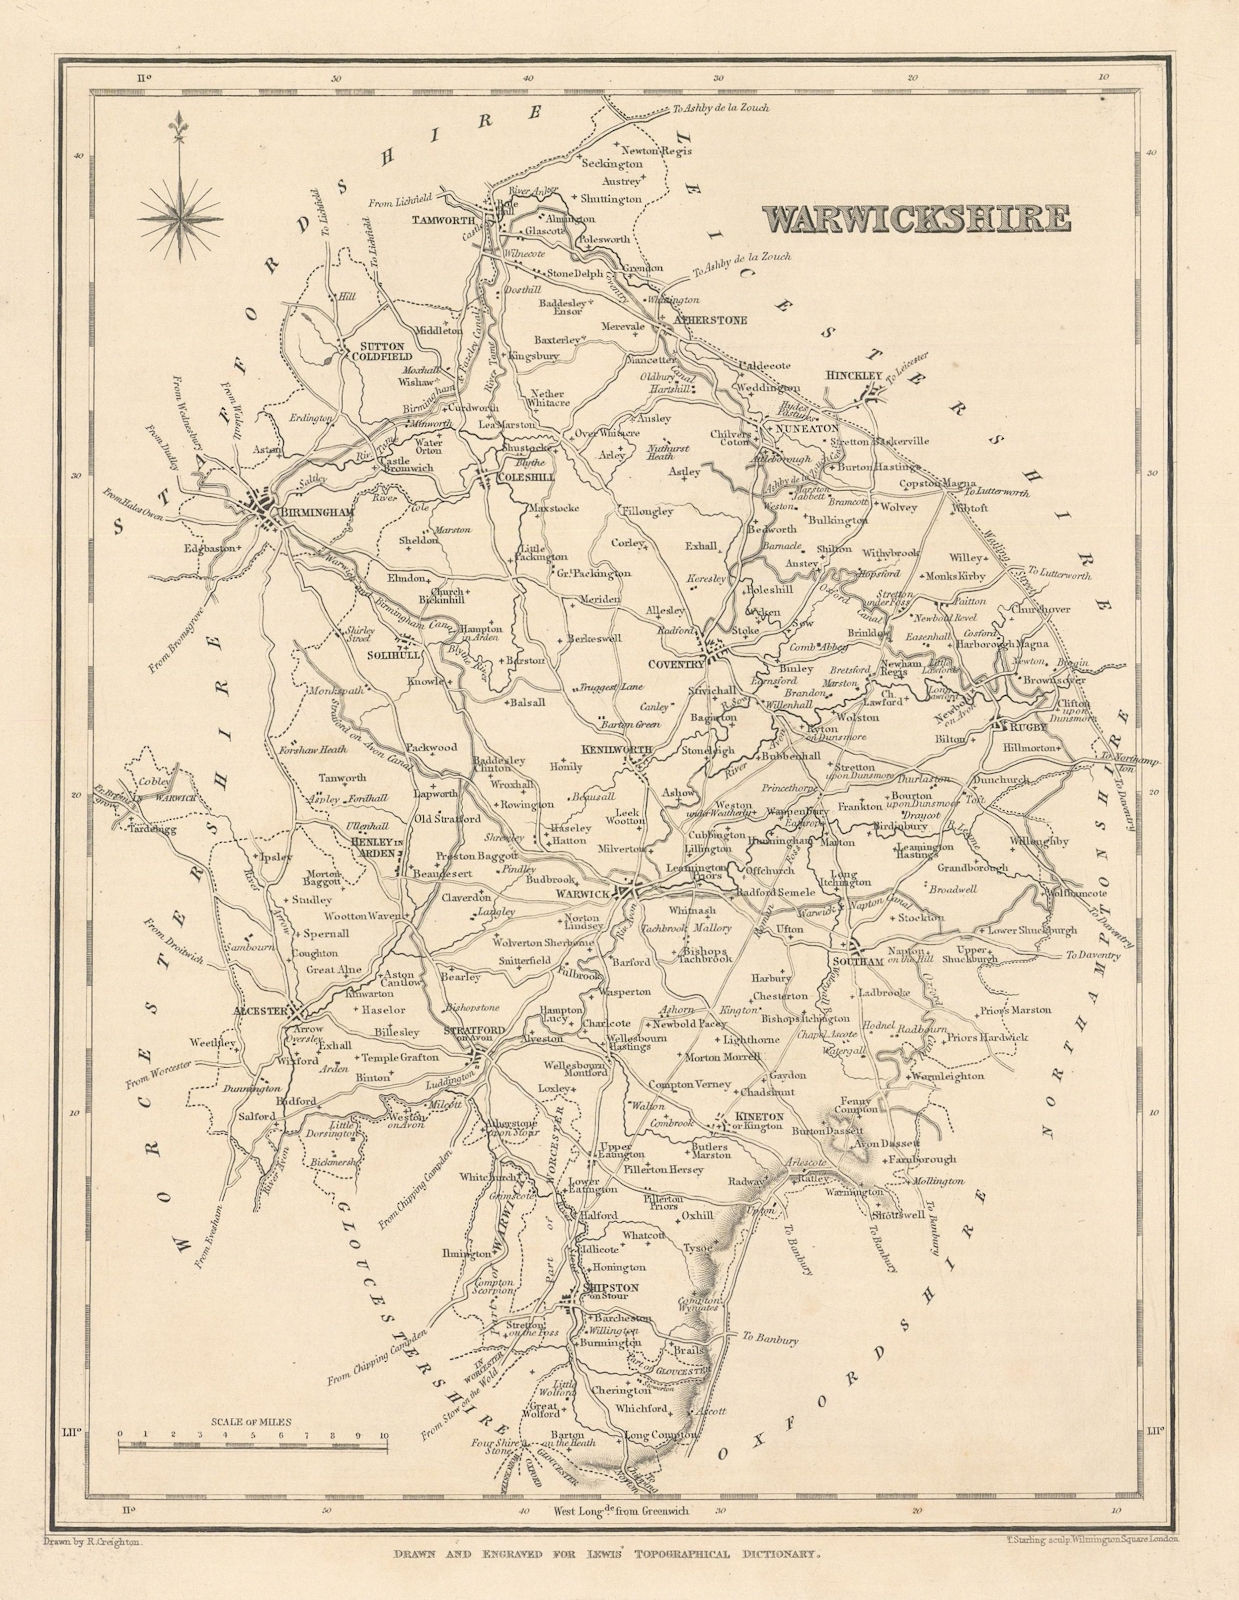 Associate Product Antique county map of WARWICKSHIRE by Starling & Creighton for Lewis c1840